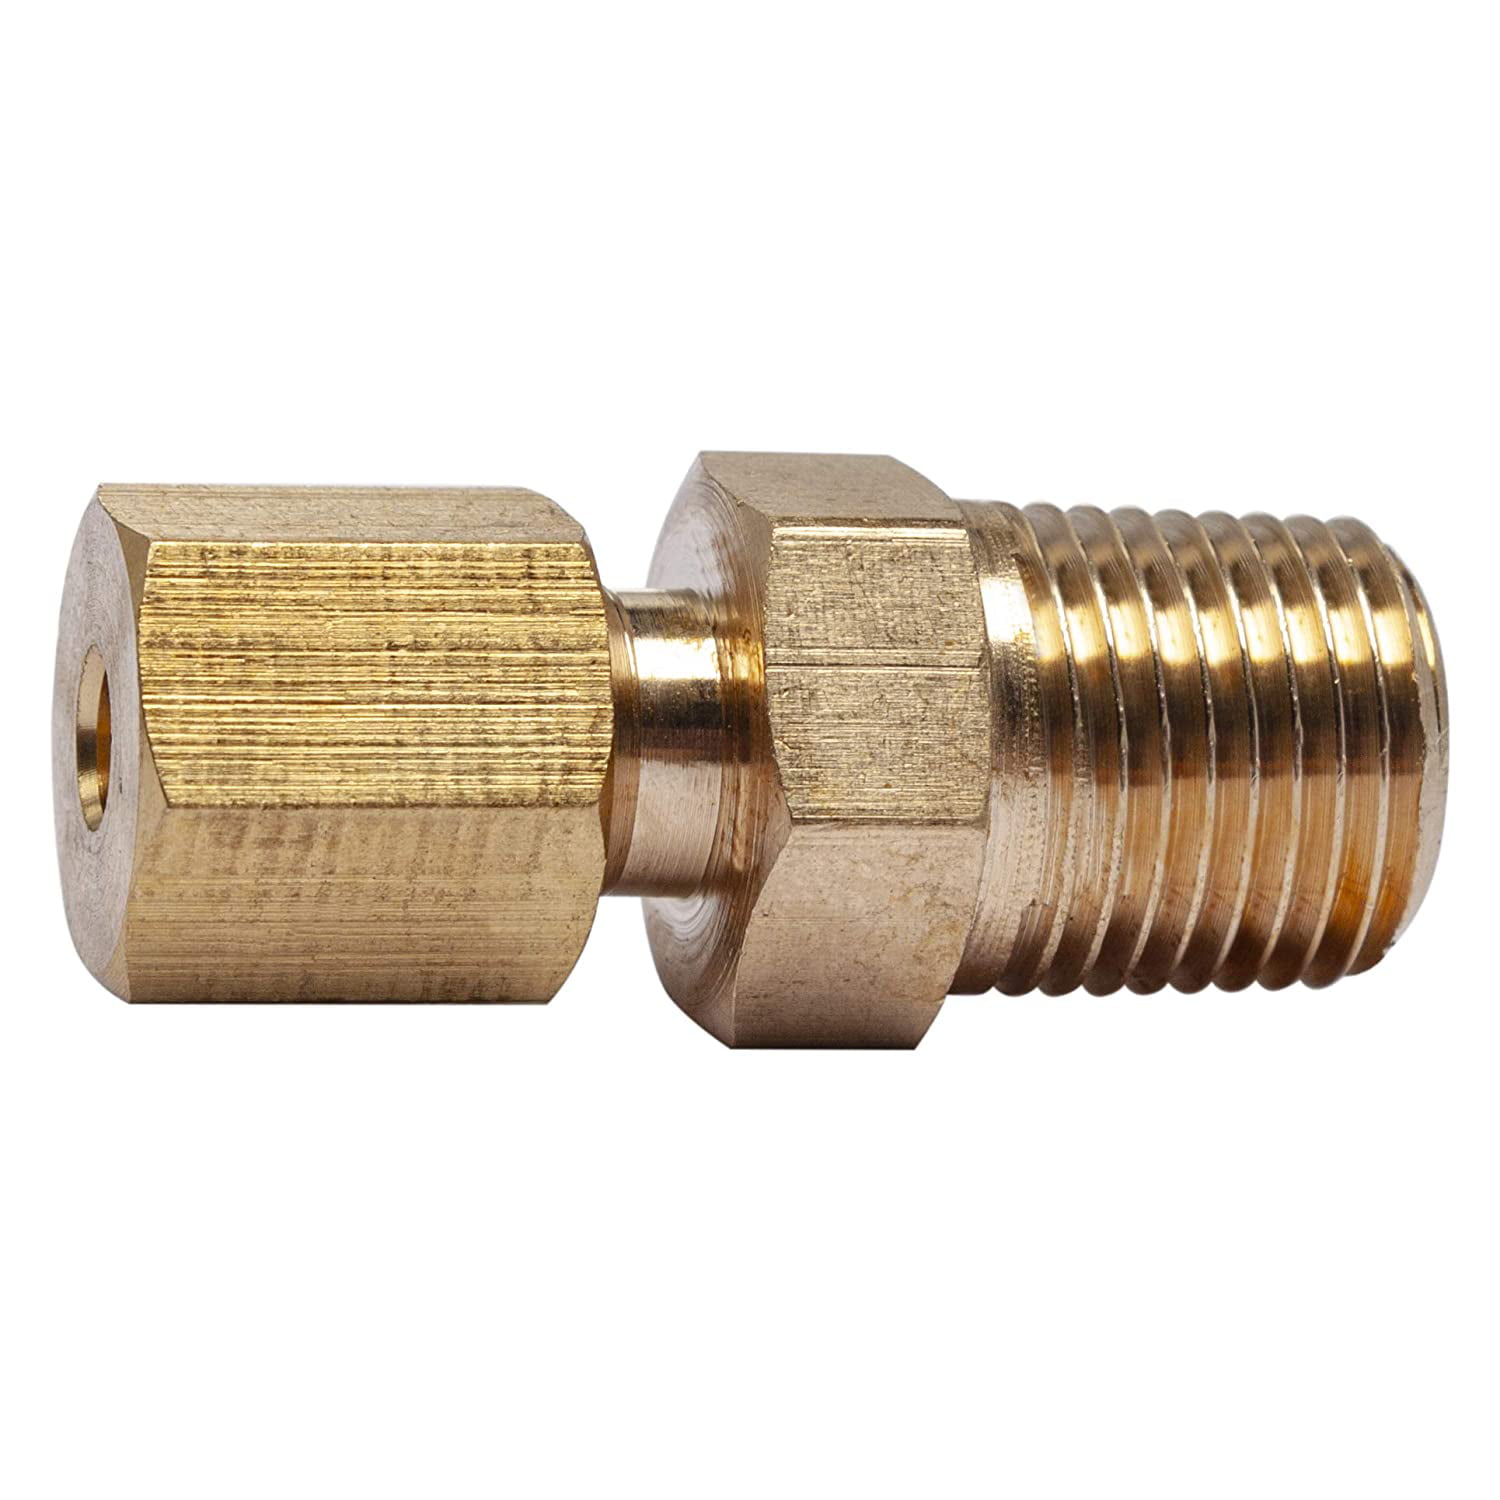 25pcs 3 ways 1/8" BSP Tee Female Connection Pipe Brass Coupler Adapter 